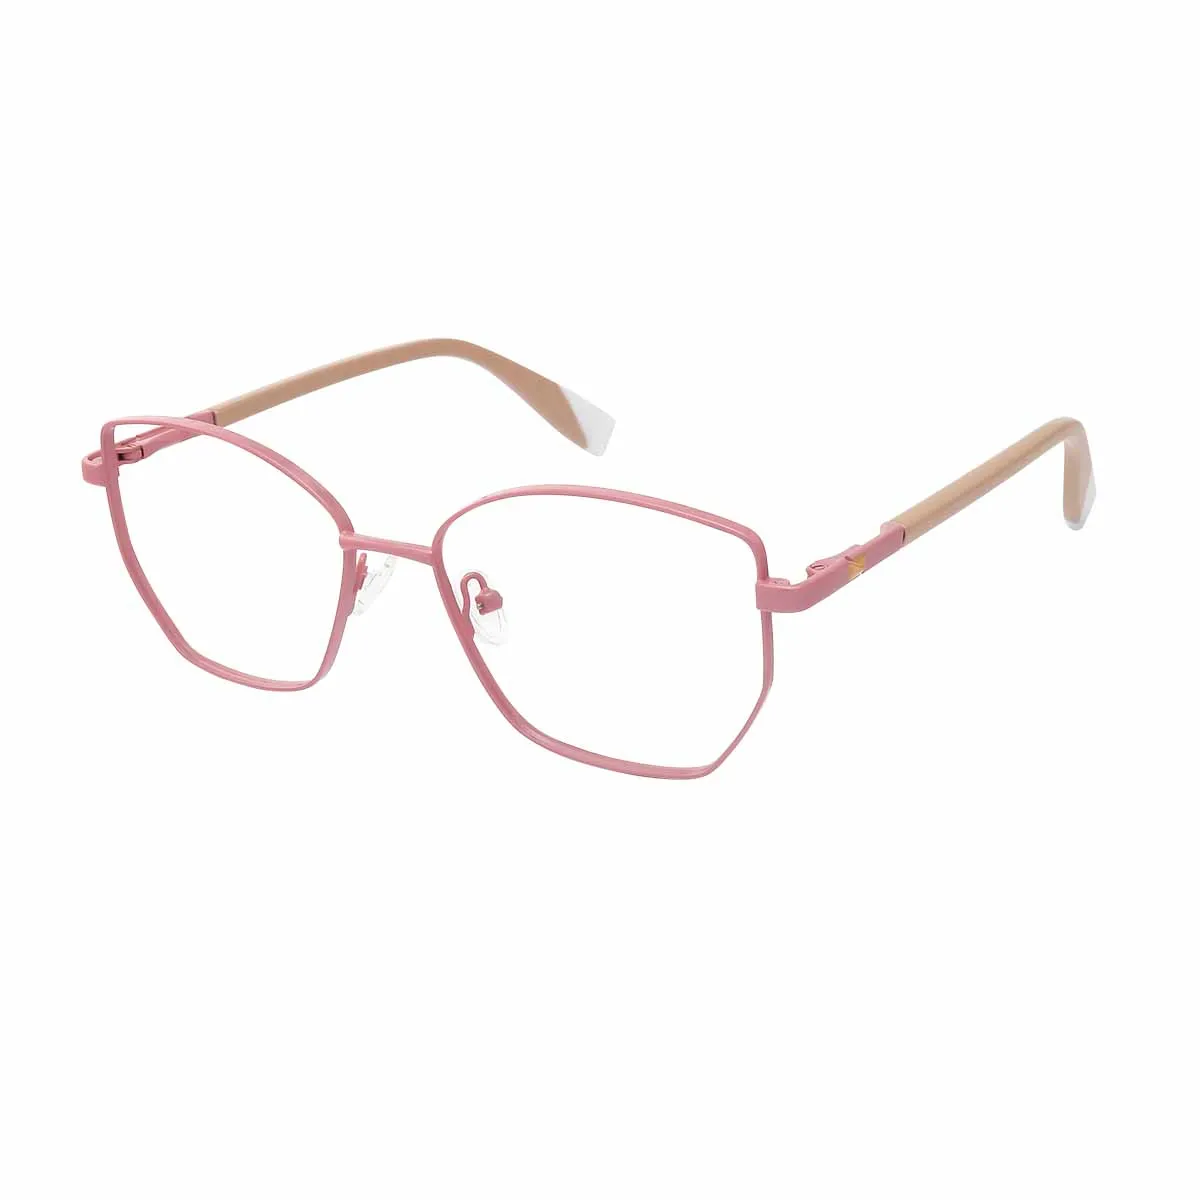 Anne - Geometric Pink/Brown Glasses for Women - EFE